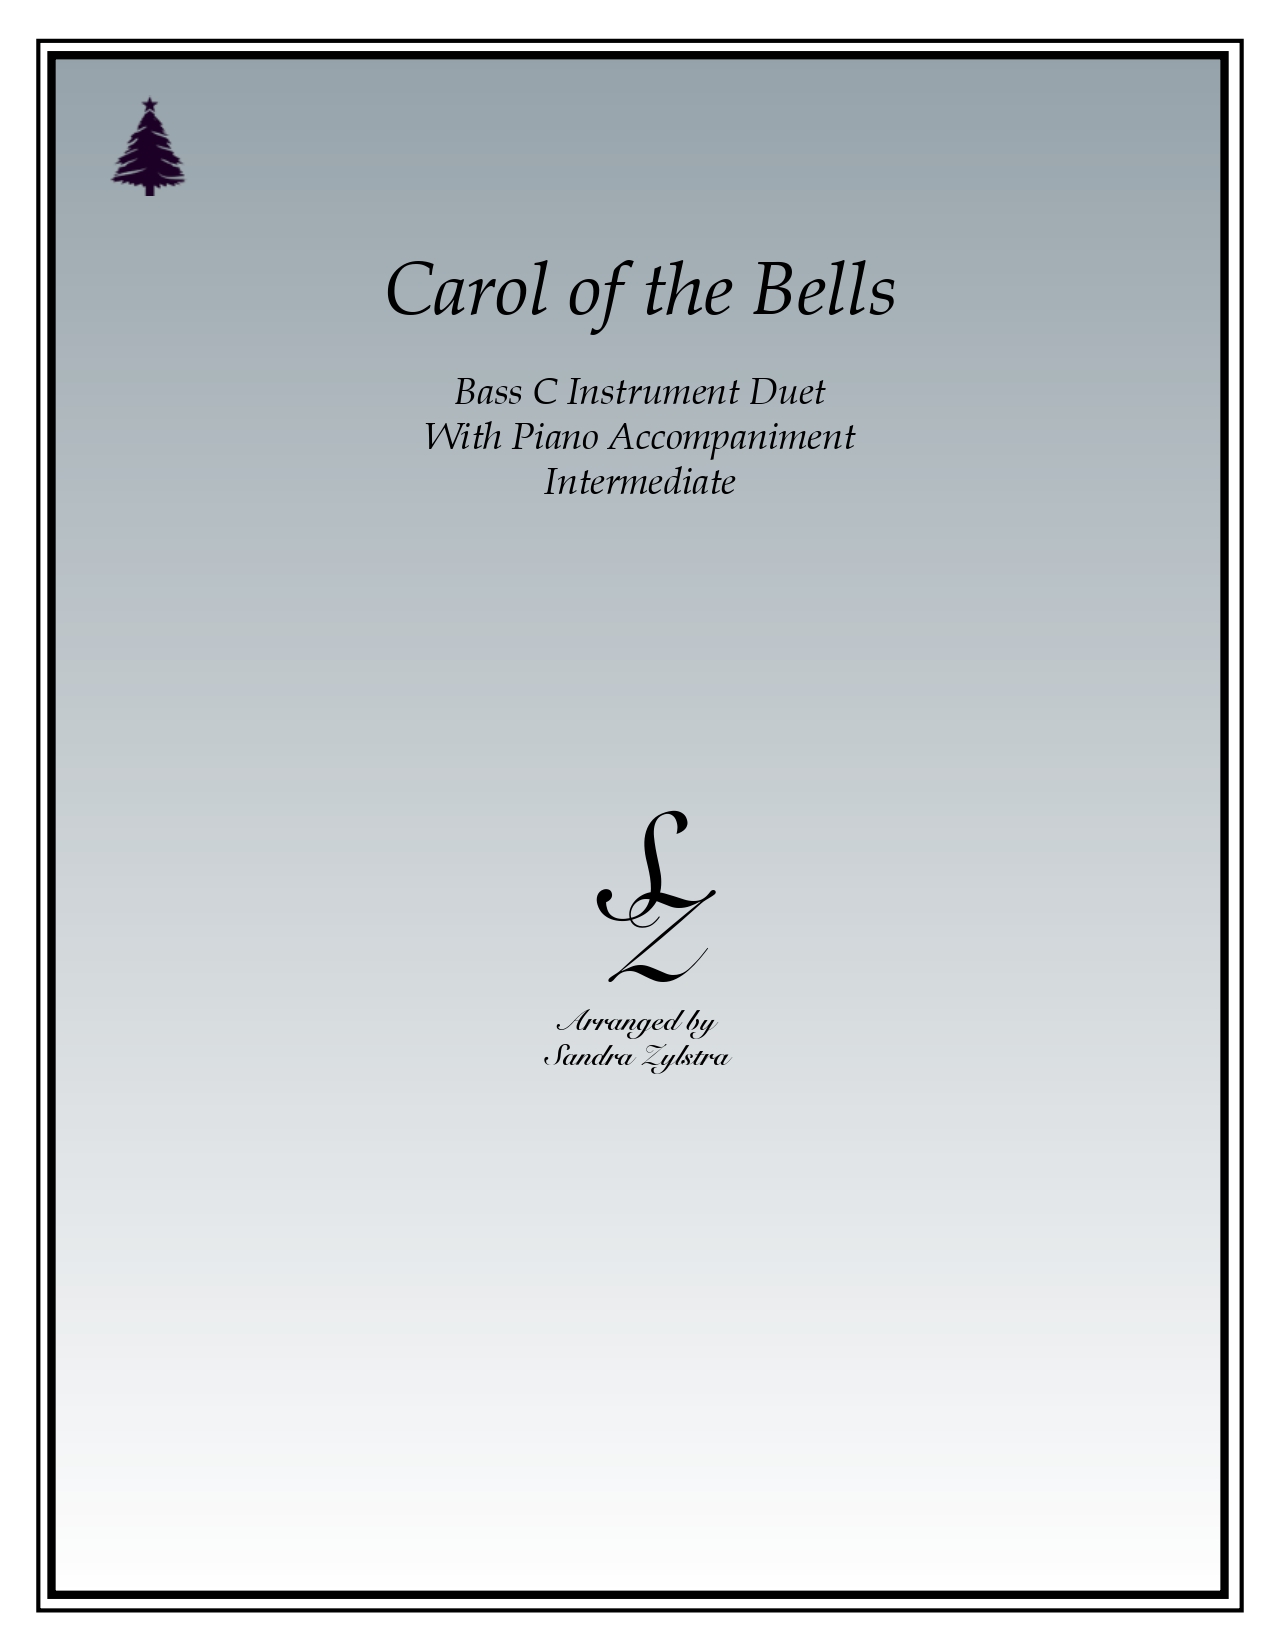 Carol Of The Bells bass C instrument duet parts cover page 00011